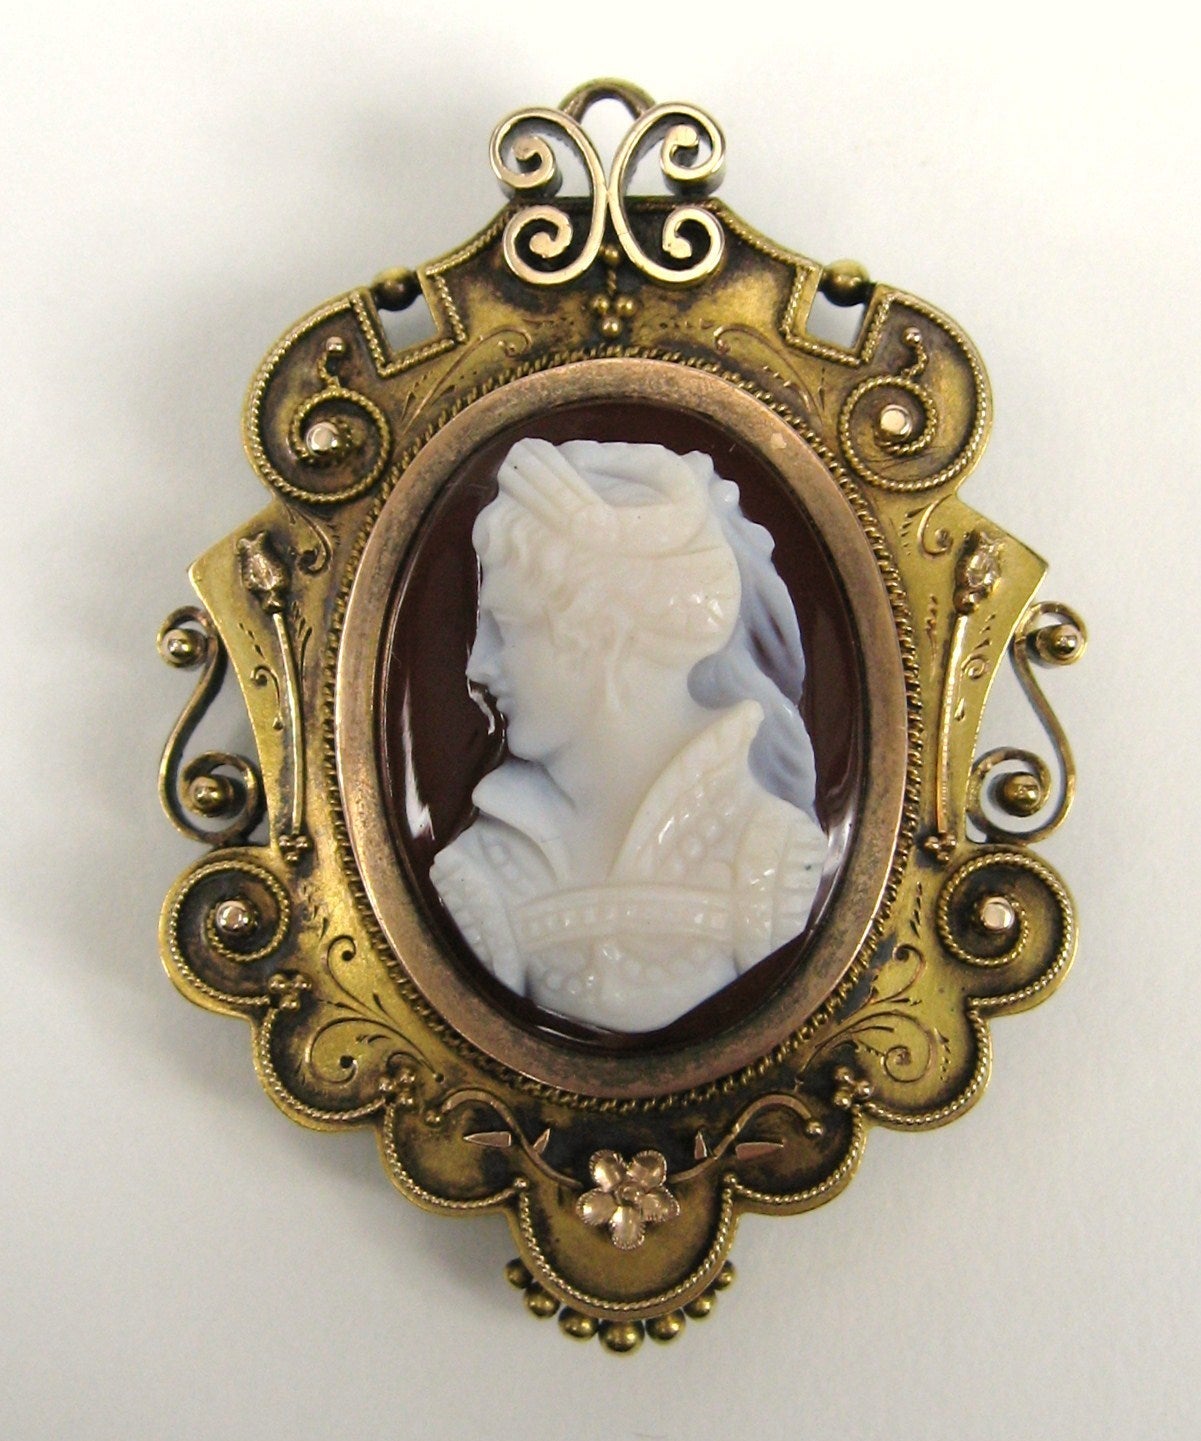 Victorian agate cameo brooch with hair locket in the back. Set in 14K gold. The Back opens has never been used. Depicts a soldier. Tons of scroll work on the surround. Measures 2.40 in.  x 1.43 in. This is out of a massive collection of Hopi, Zuni,